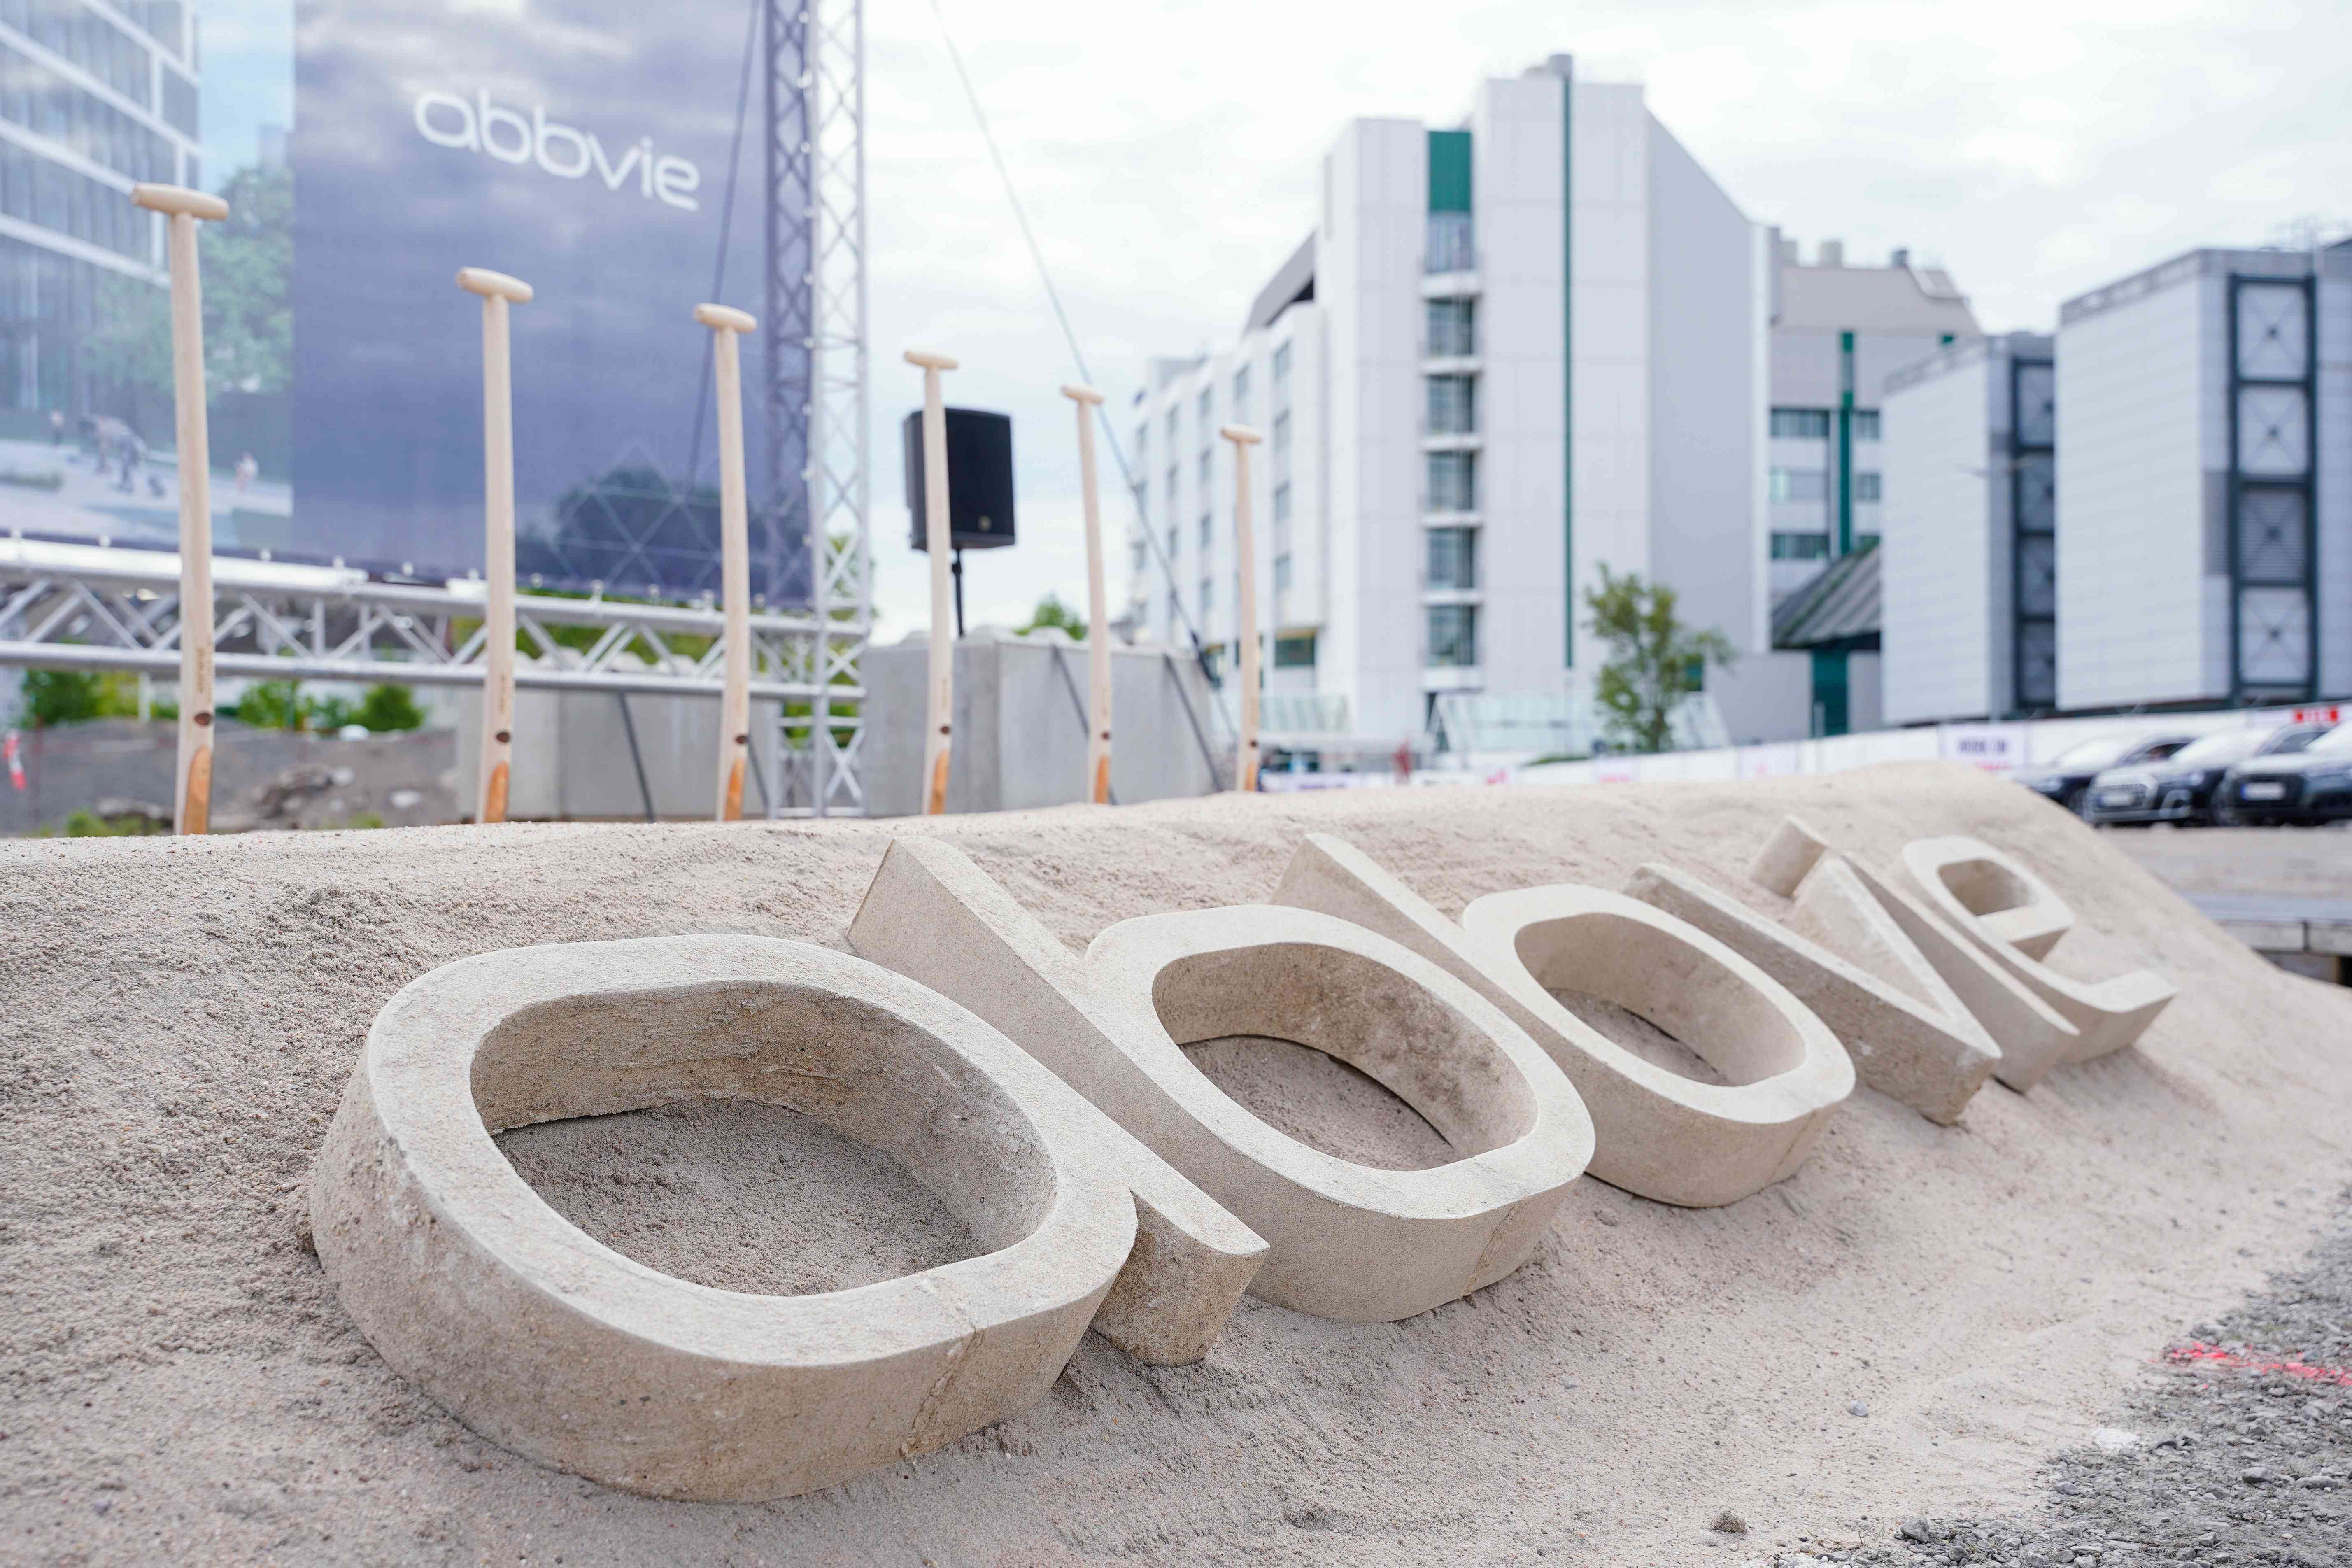 A company logo is displayed on a sand hill on the premises of the pharmaceutical company AbbVie at the official ground-breaking ceremony for the construction of a new research and development building in Germany